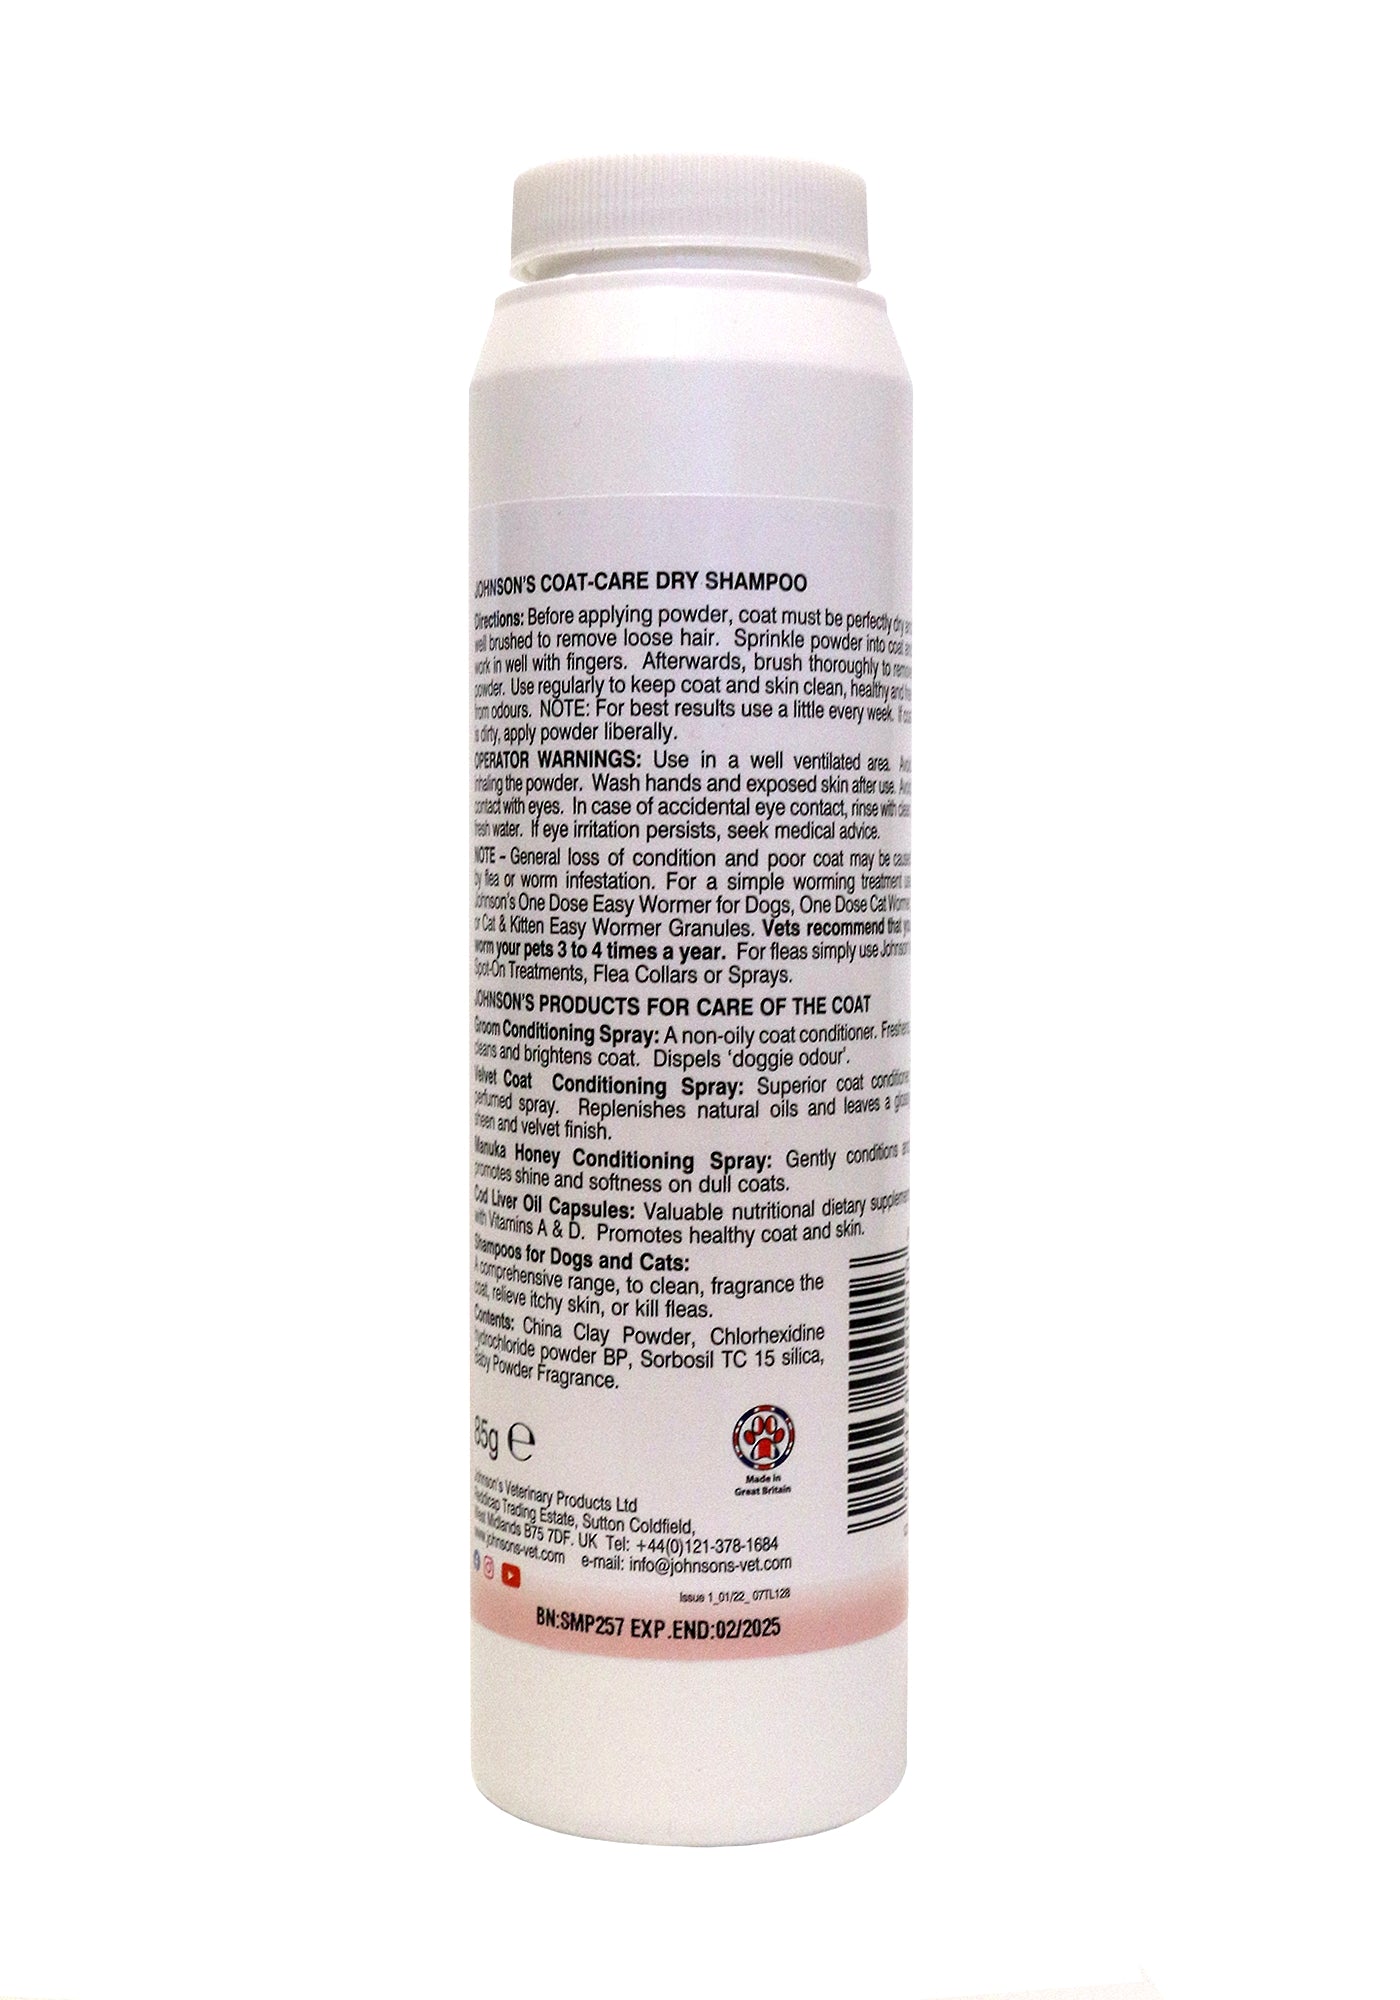 Johnson's - Coat Care Dry Shampoo for Dogs and Cats - 85g